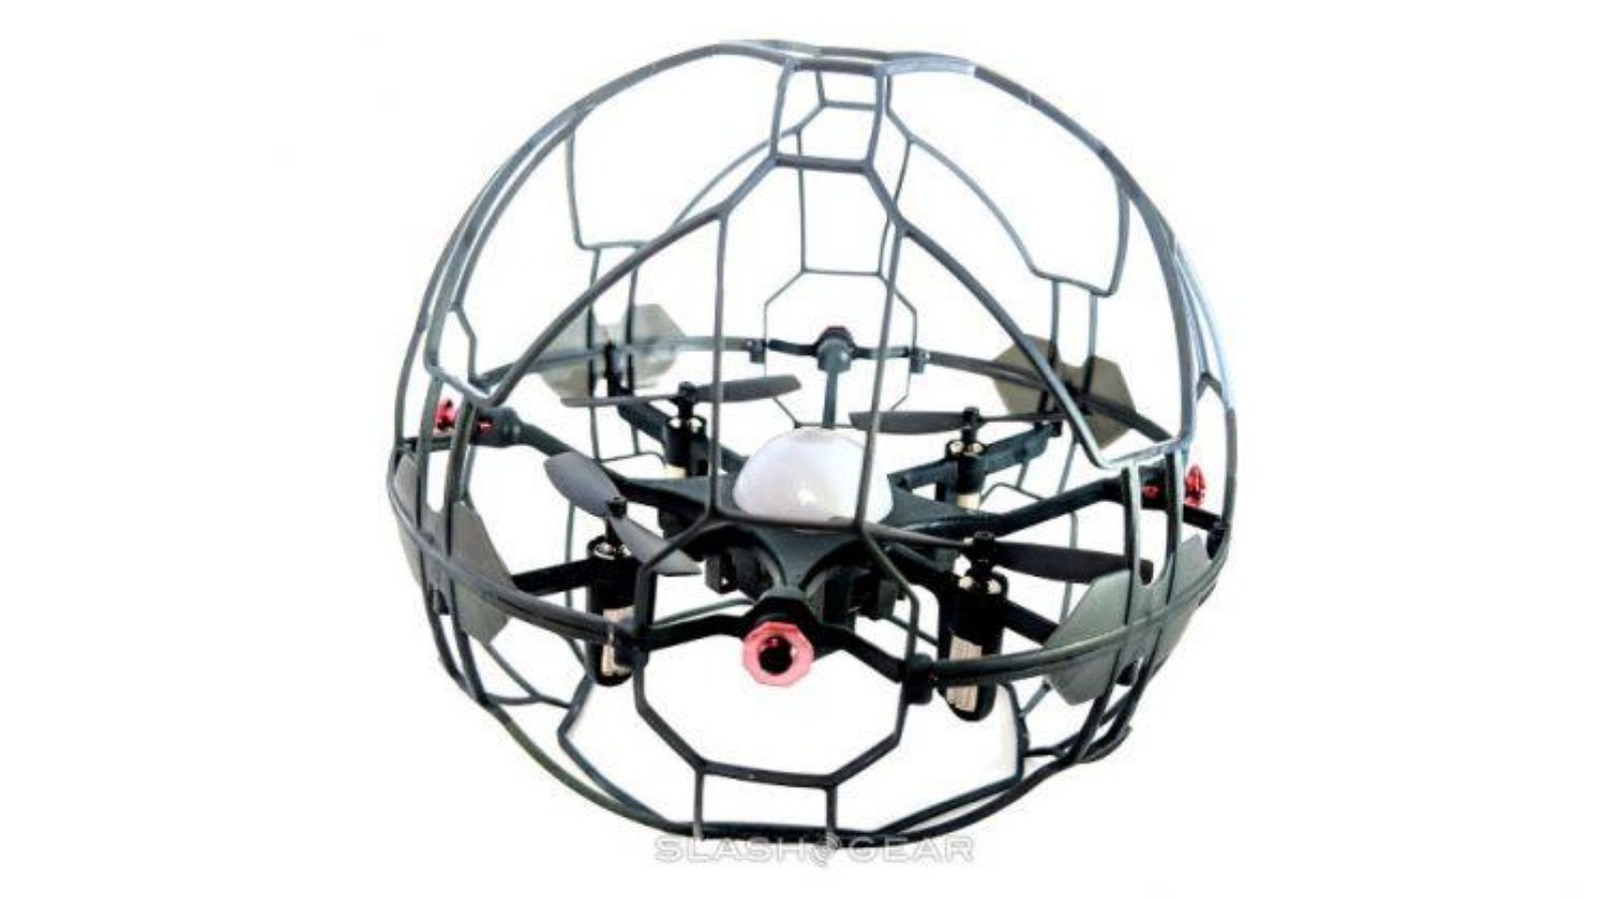 kontakt Reproducere TVstation Air Hogs Supernova Review: Simple Drone With Motion Control